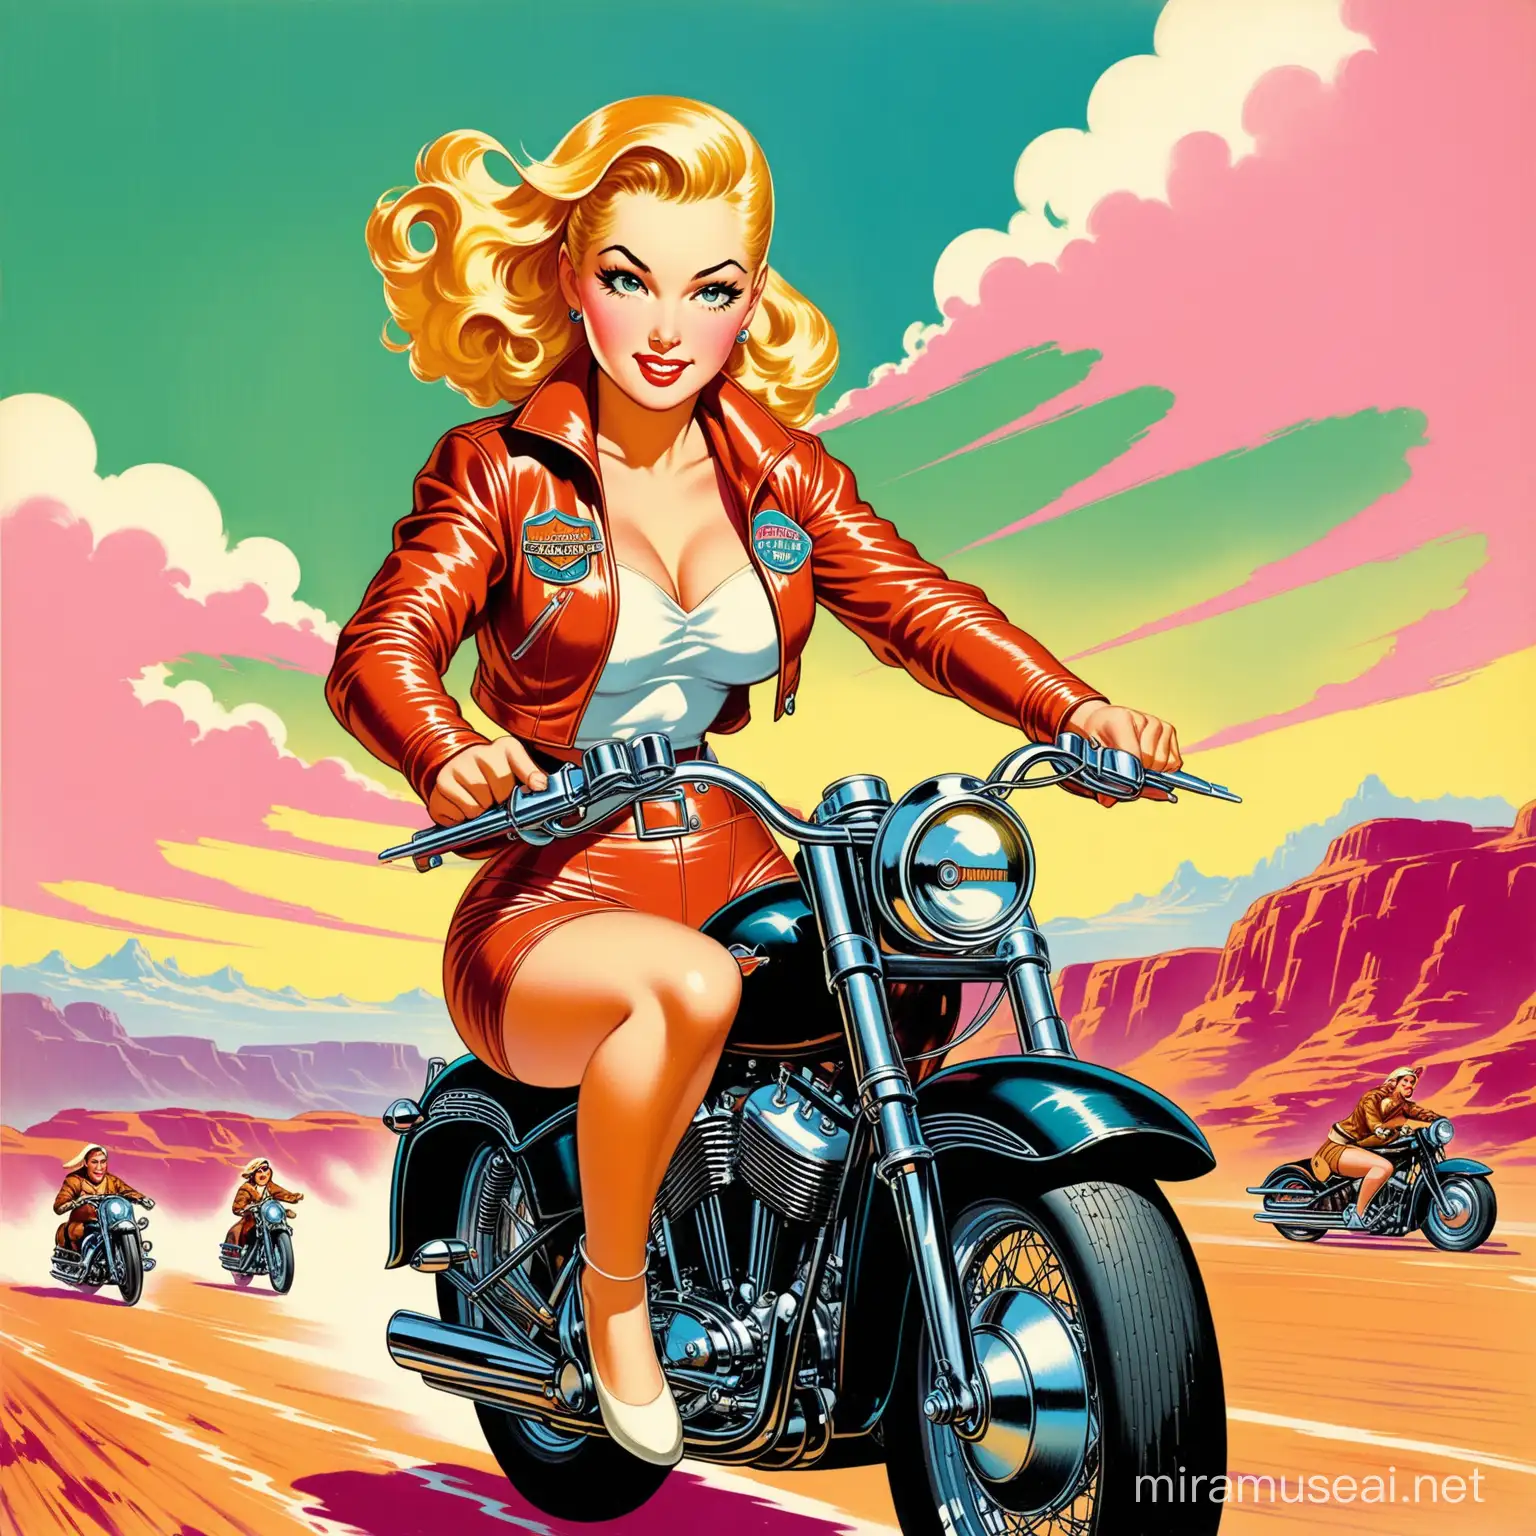 Madonna Ciccone Wearing Leather Jacket Riding Harley Davidson Motorcycle in Retro Futuristic Style